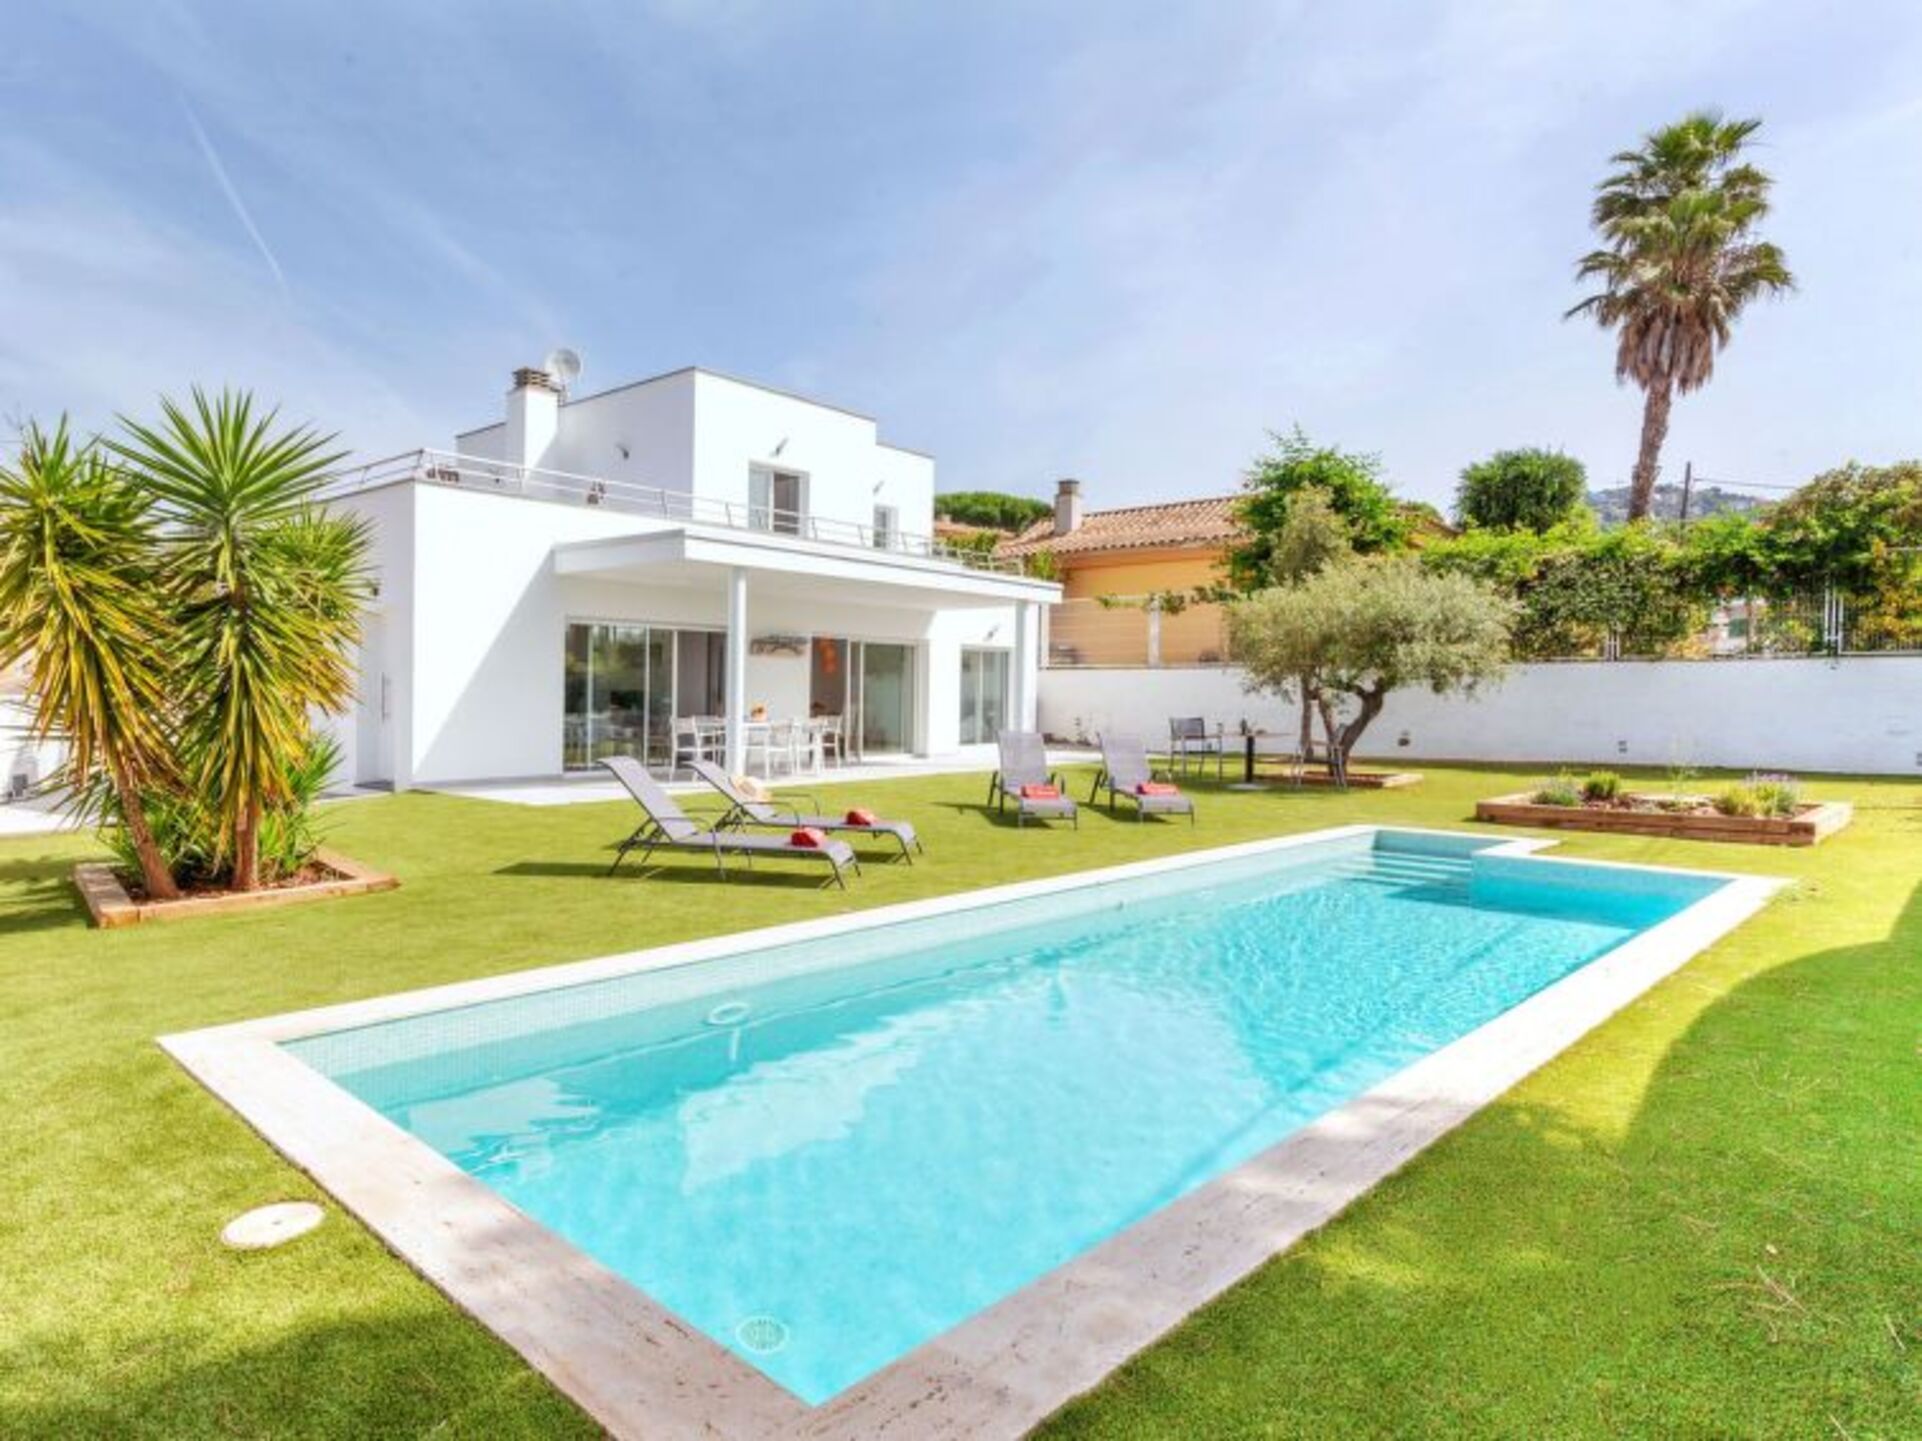 Property Image 1 - Property Manager Villa with First Class Amenities, Costa Brava Villa 1082